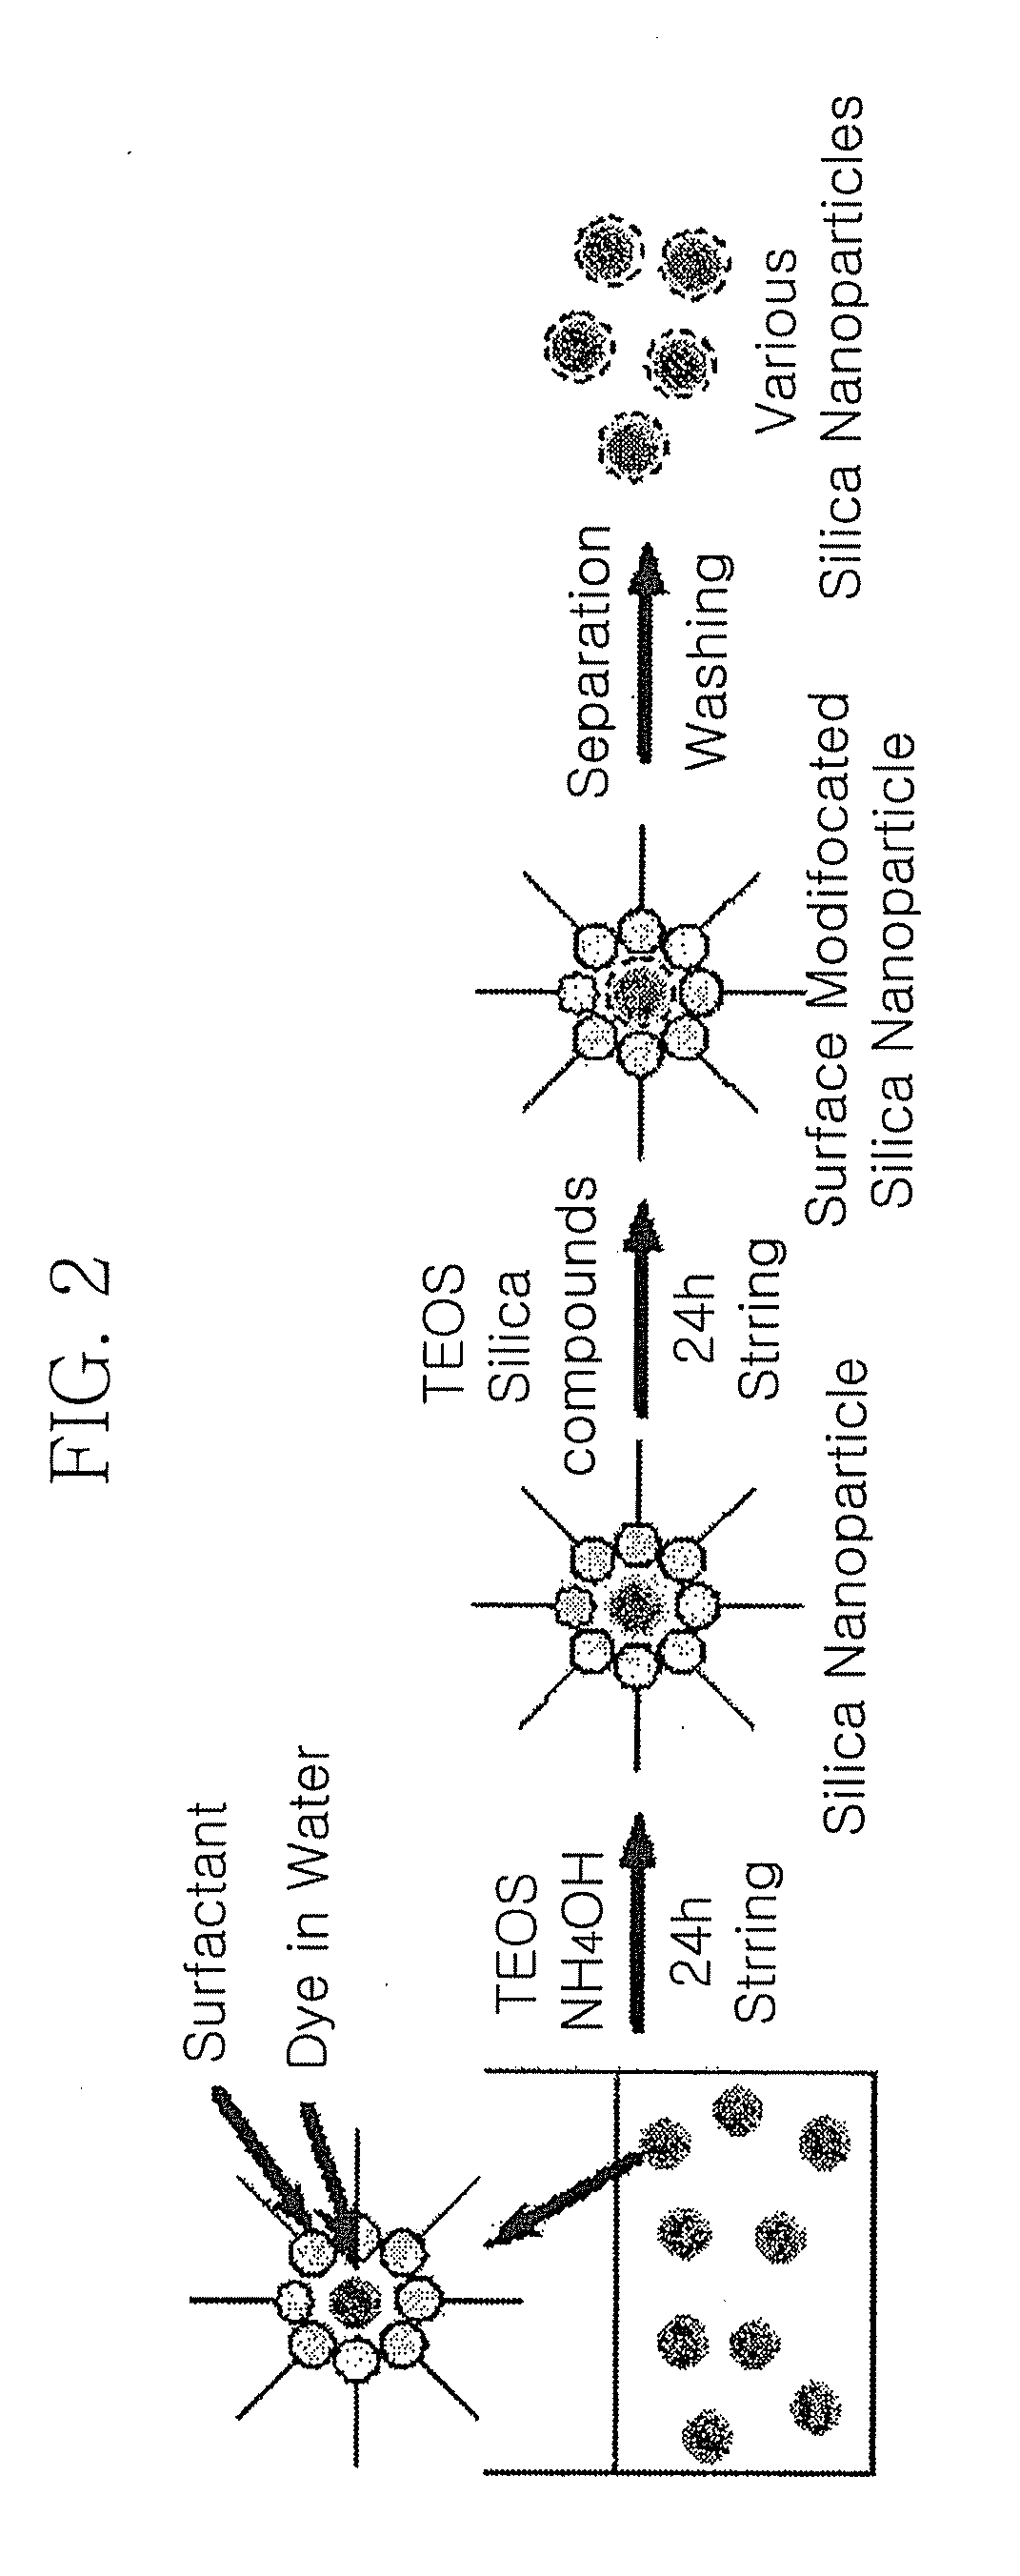 Functionalized silica nanoparticles having polyethylene glycol linkage and production method thereof